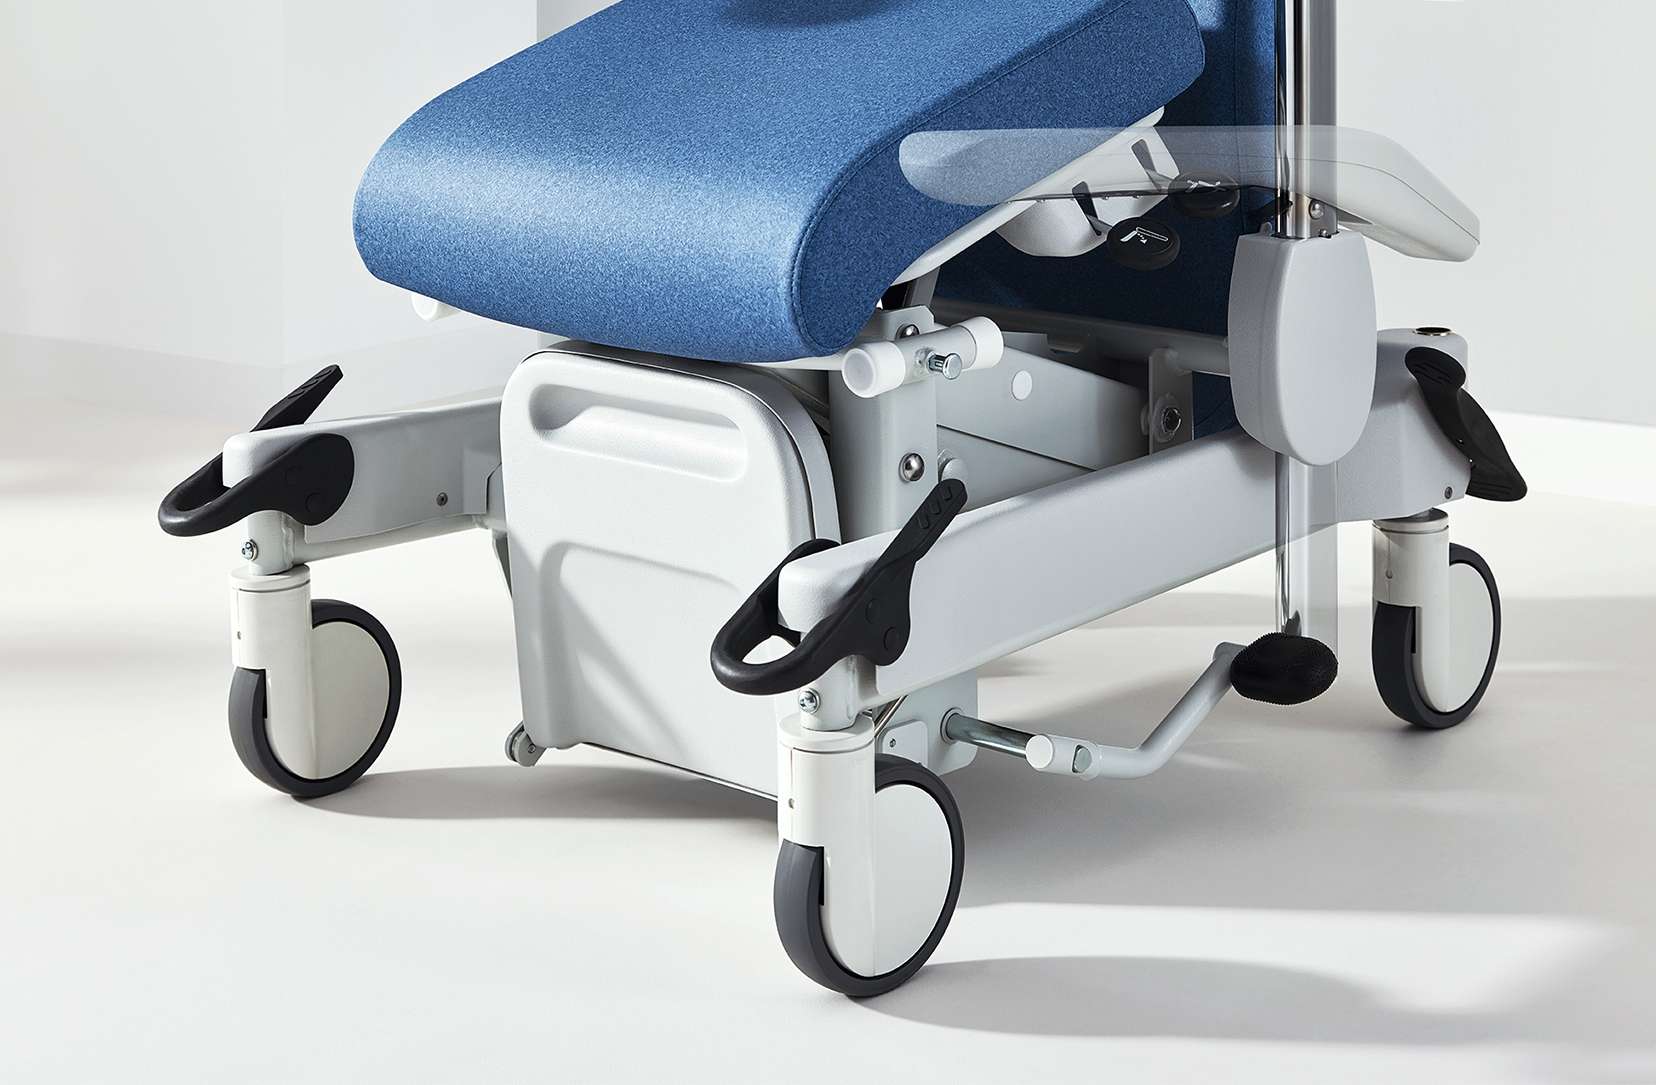 6-stage armrest height adjustment on the Ravello transport chair